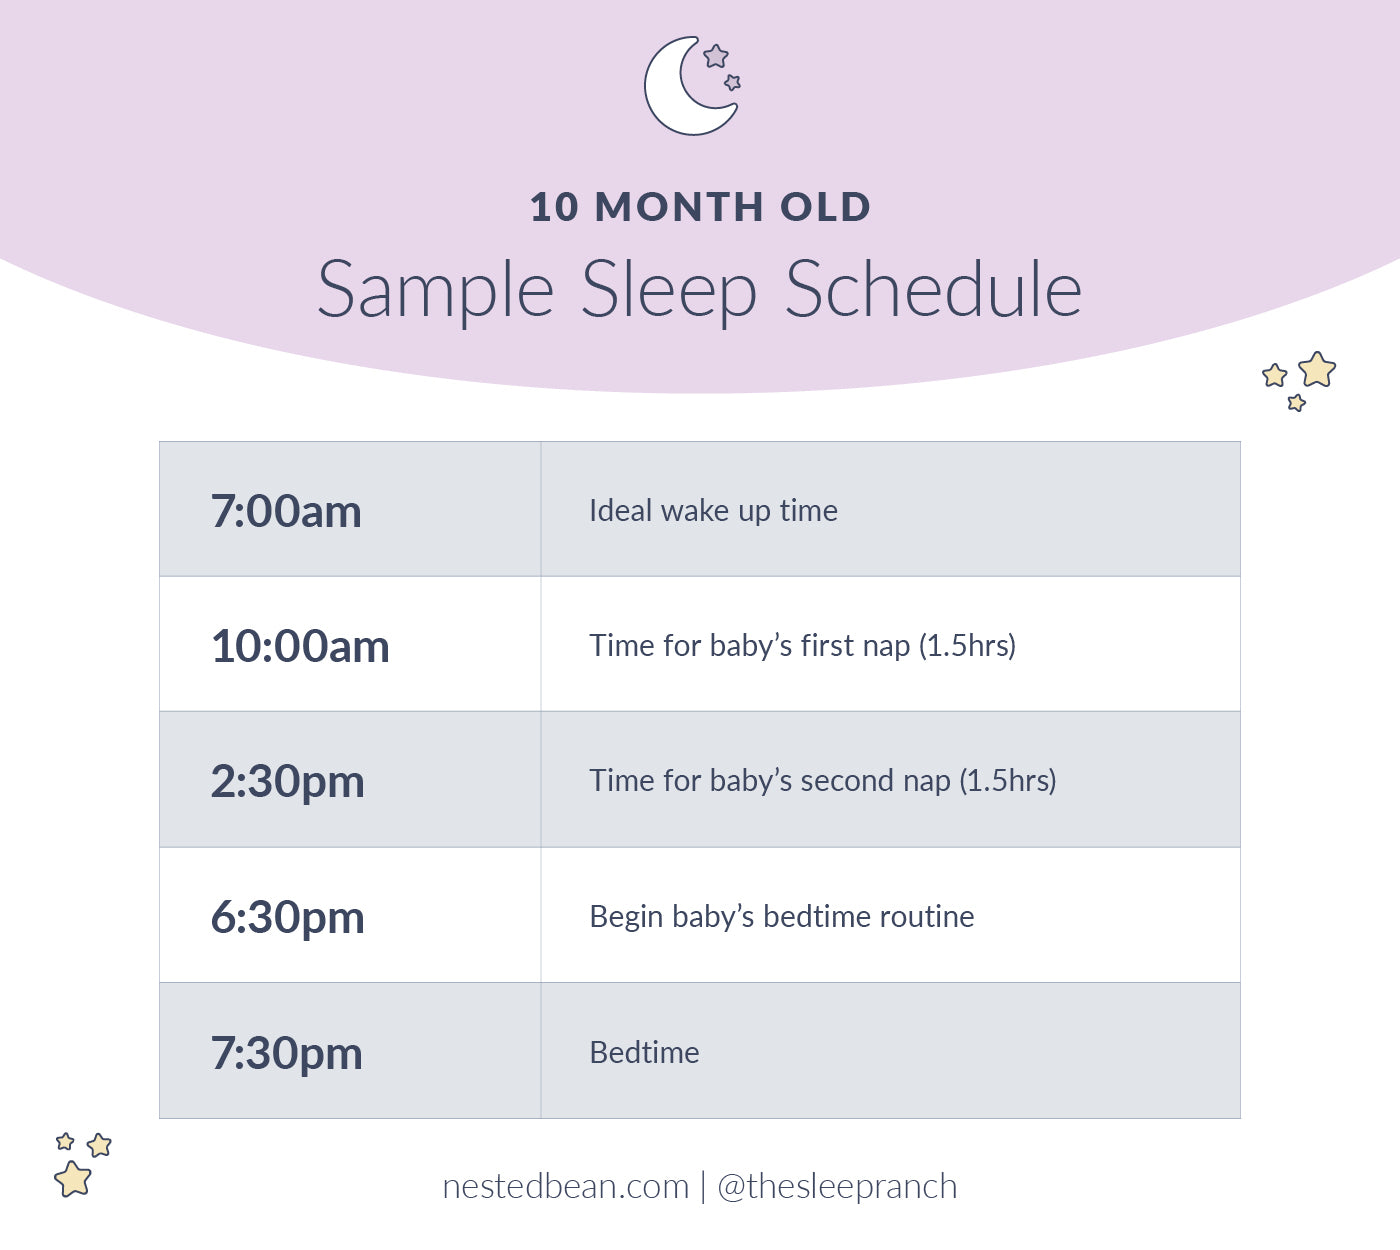 10 month old sleep schedule infographic